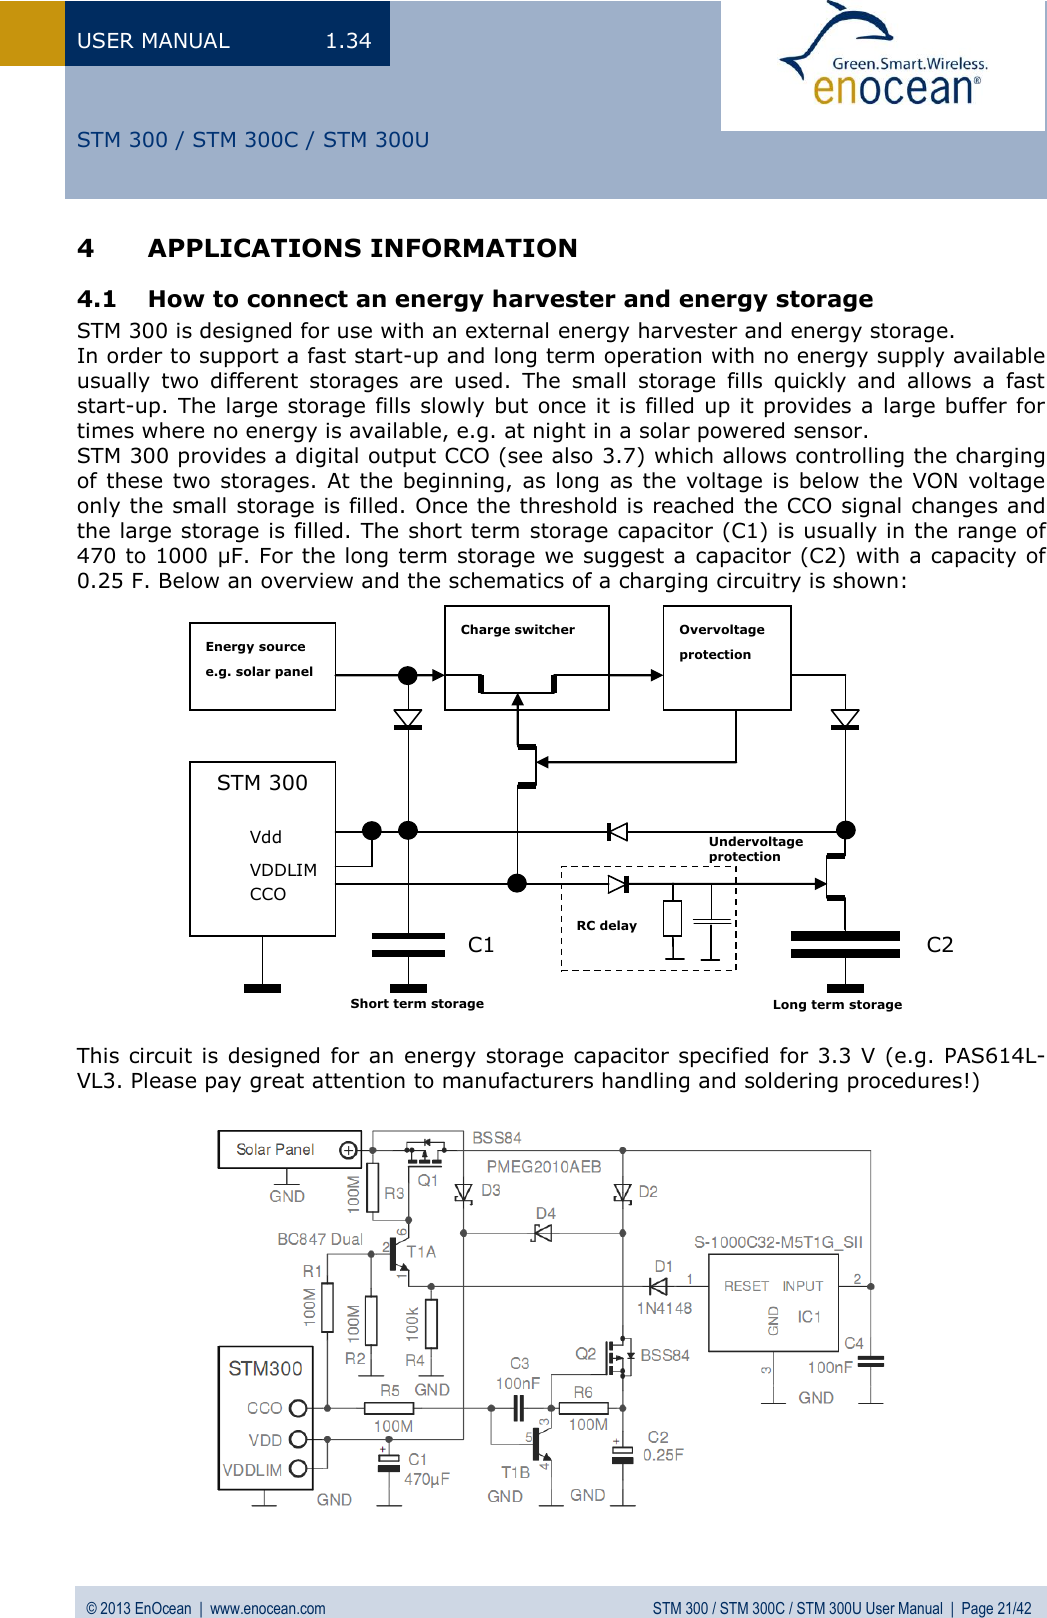 USER MANUAL  1.34 © 2013 EnOcean  |  www.enocean.com  STM 300 / STM 300C / STM 300U User Manual  |  Page 21/42   STM 300 / STM 300C / STM 300U Energy source e.g. solar panel Charge switcher Overvoltage protection STM 300  Vdd  VDDLIM   CCO    Undervoltage protection  RC delay Short term storage   Long term storage  4 APPLICATIONS INFORMATION 4.1 How to connect an energy harvester and energy storage STM 300 is designed for use with an external energy harvester and energy storage. In order to support a fast start-up and long term operation with no energy supply available usually  two  different  storages  are  used.  The  small  storage  fills  quickly  and  allows  a  fast start-up. The large storage fills slowly but once it is filled up it provides a large buffer for times where no energy is available, e.g. at night in a solar powered sensor. STM 300 provides a digital output CCO (see also 3.7) which allows controlling the charging of these two storages.  At  the beginning,  as long as the voltage is below the VON  voltage only the small storage is filled. Once the threshold is reached the CCO signal changes and the large storage is filled. The short term storage capacitor (C1) is usually in the range of 470 to 1000 µF. For the long term storage we suggest a capacitor (C2) with a capacity of 0.25 F. Below an overview and the schematics of a charging circuitry is shown:                   This circuit is designed for an energy storage capacitor specified  for 3.3  V (e.g. PAS614L-VL3. Please pay great attention to manufacturers handling and soldering procedures!)  C1 C2 